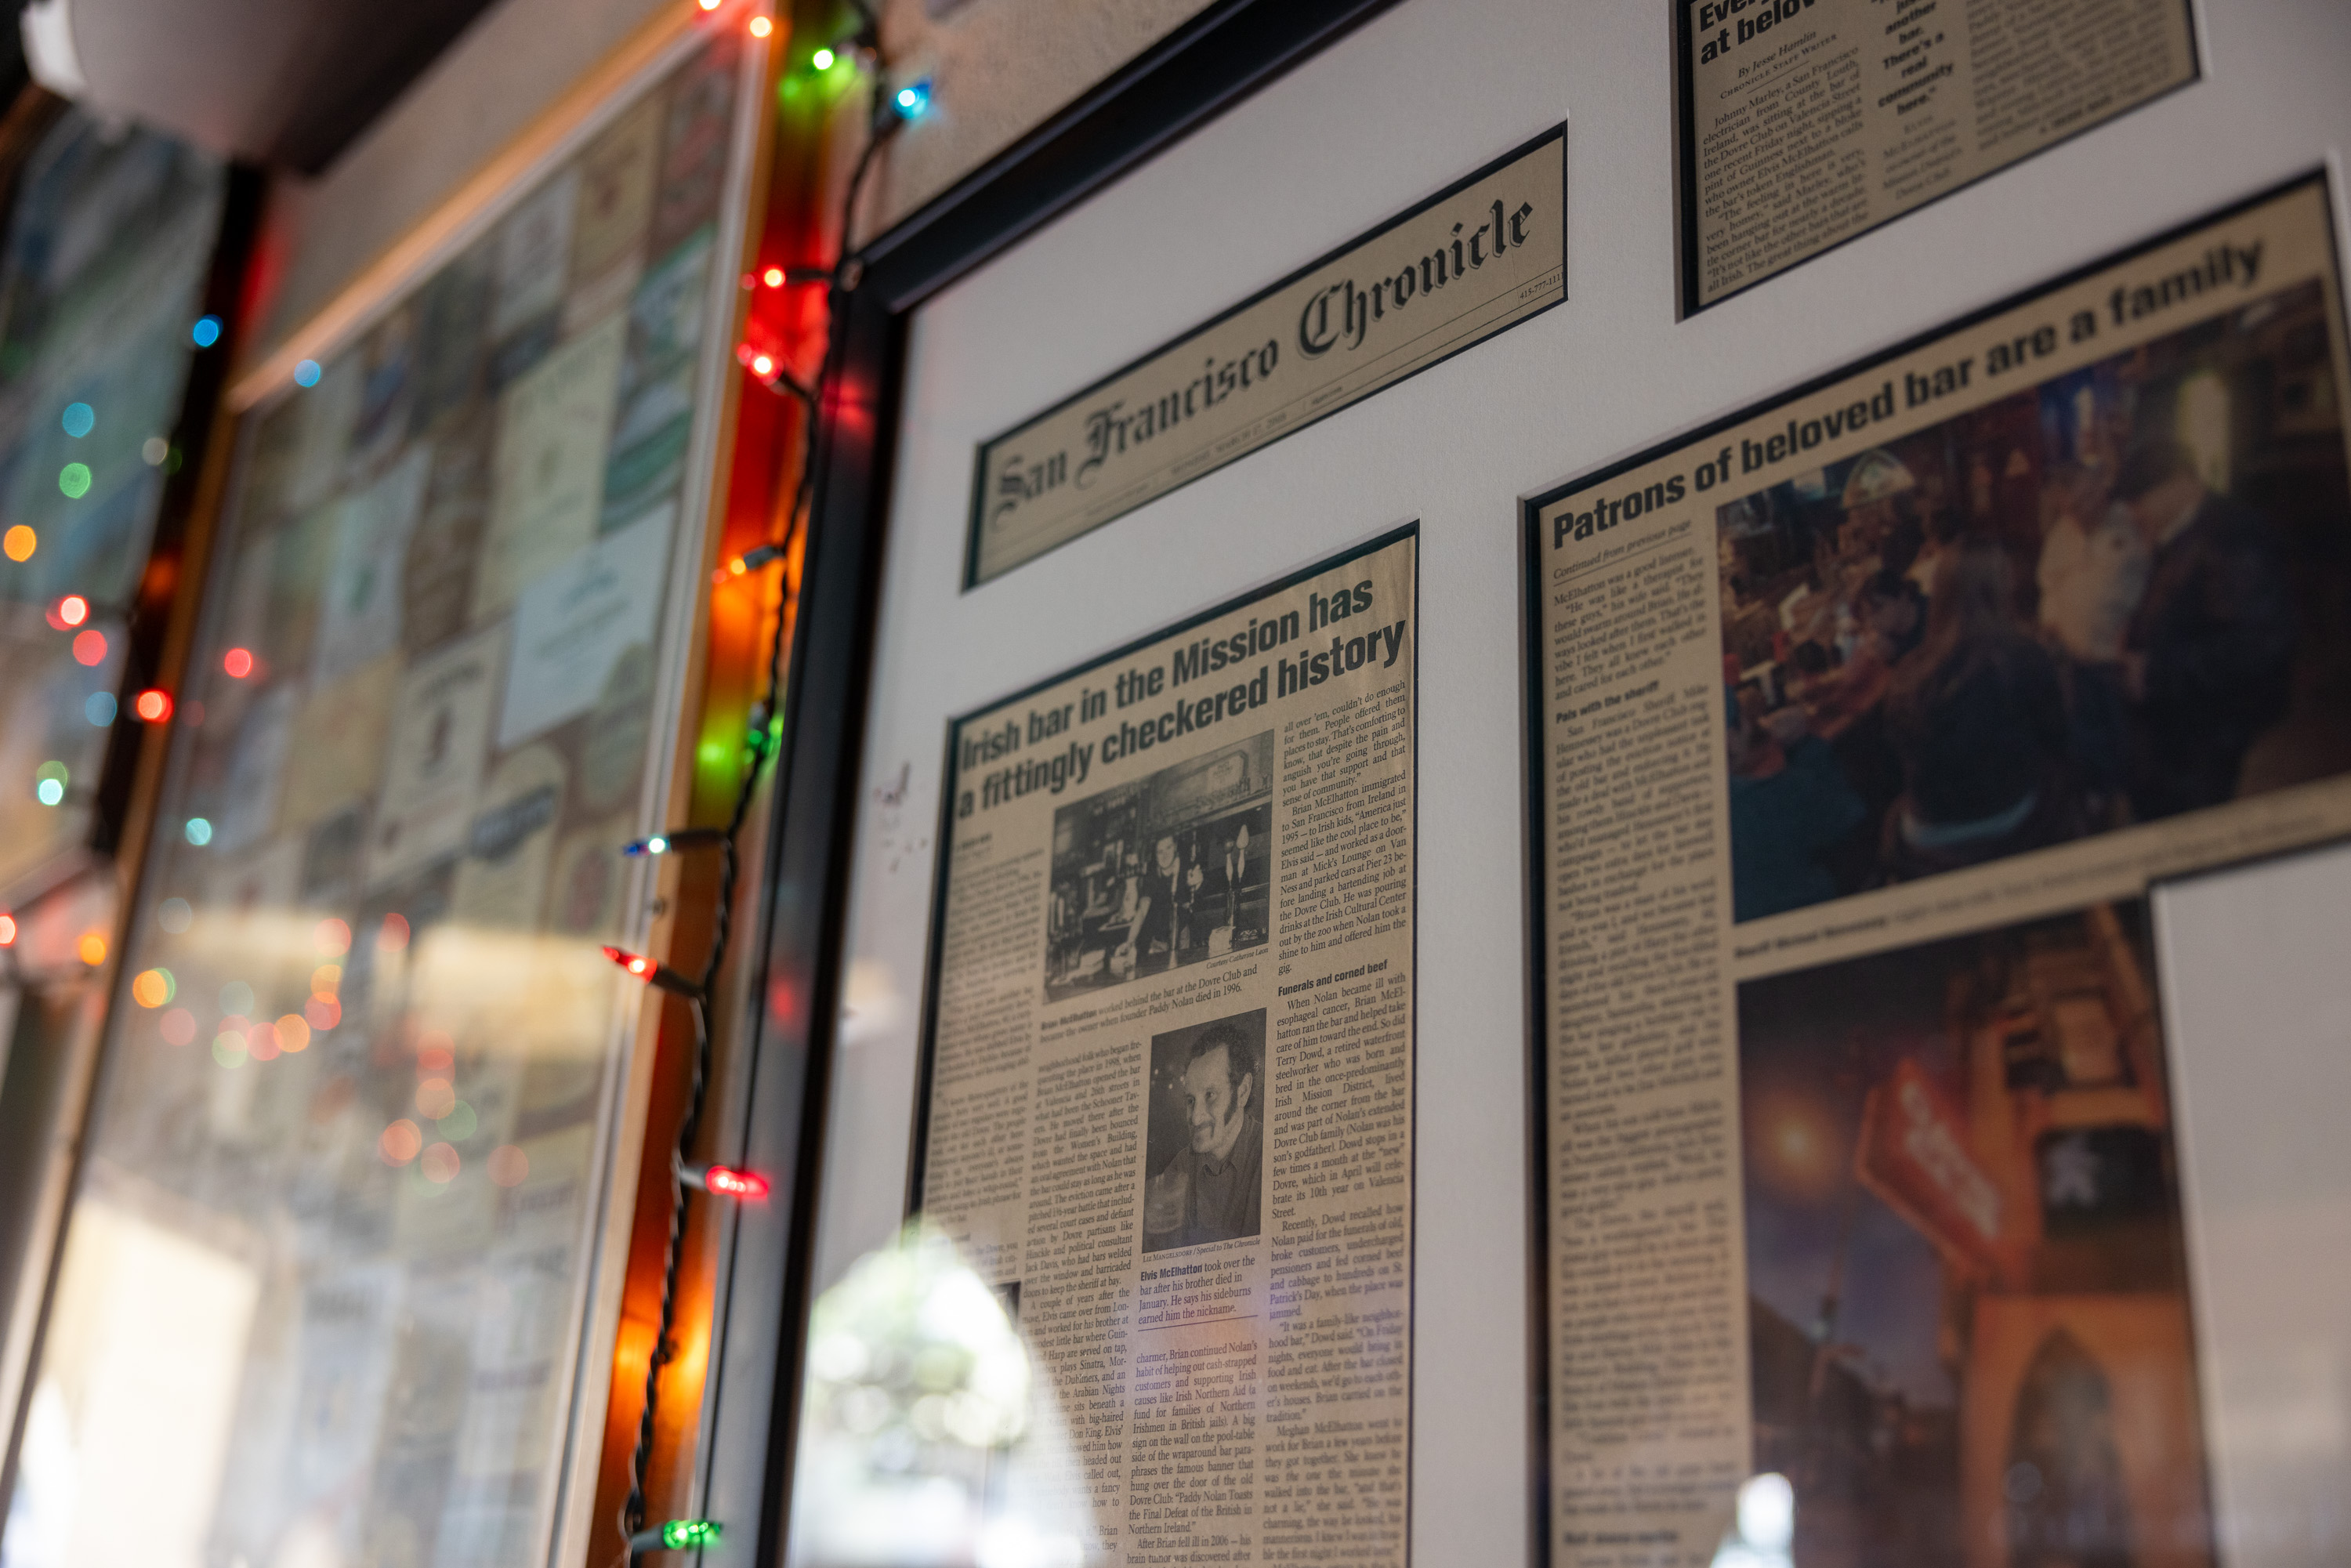 Newspaper clippings about an Irish bar are framed on a wall, adorned with small multicolored lights.